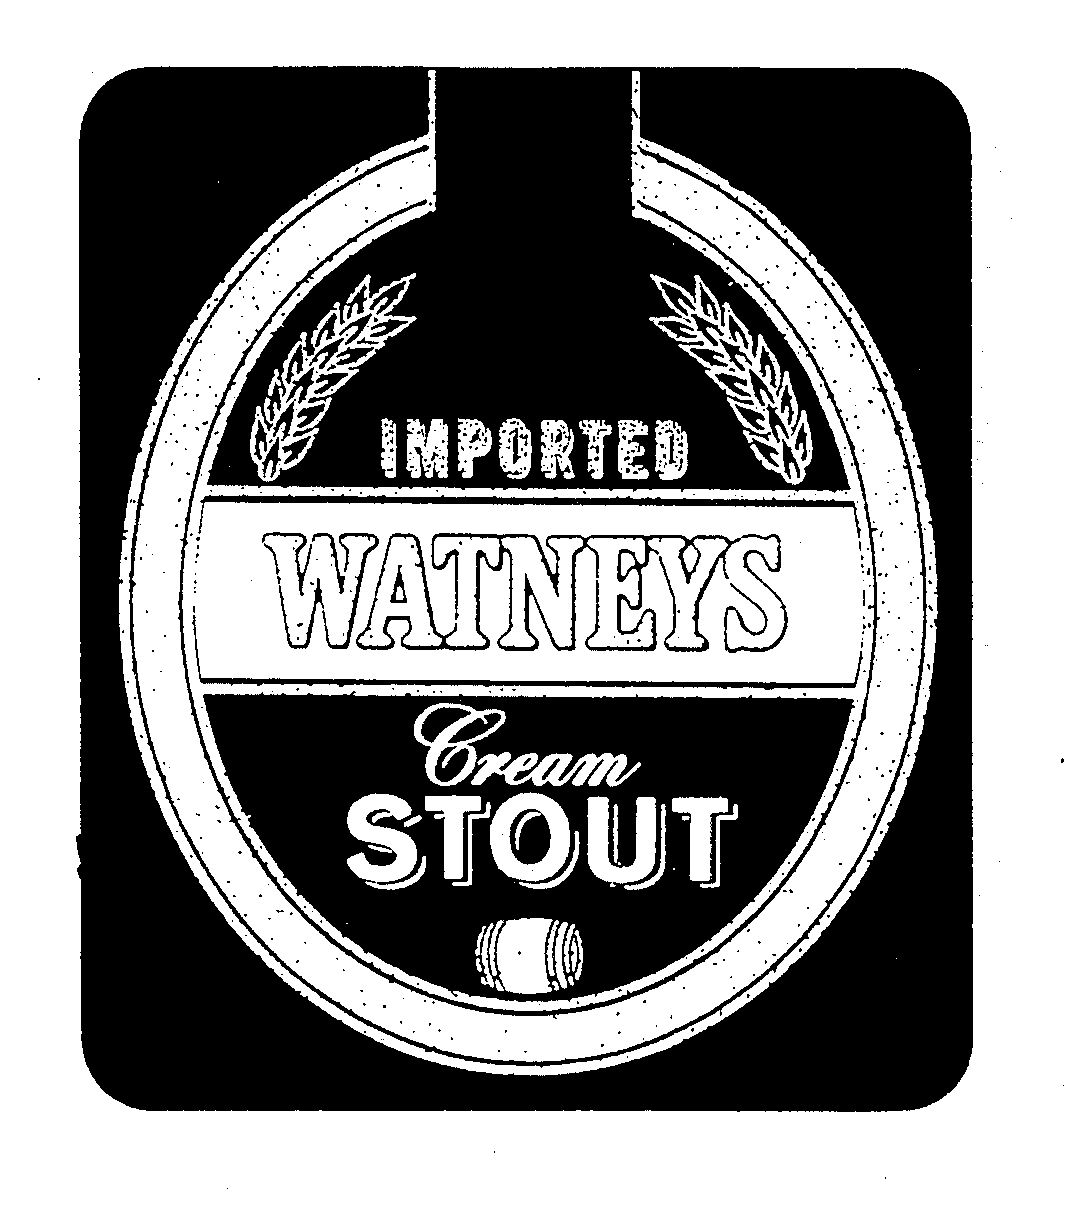  WATNEYS CREAM STOUT IMPORTED